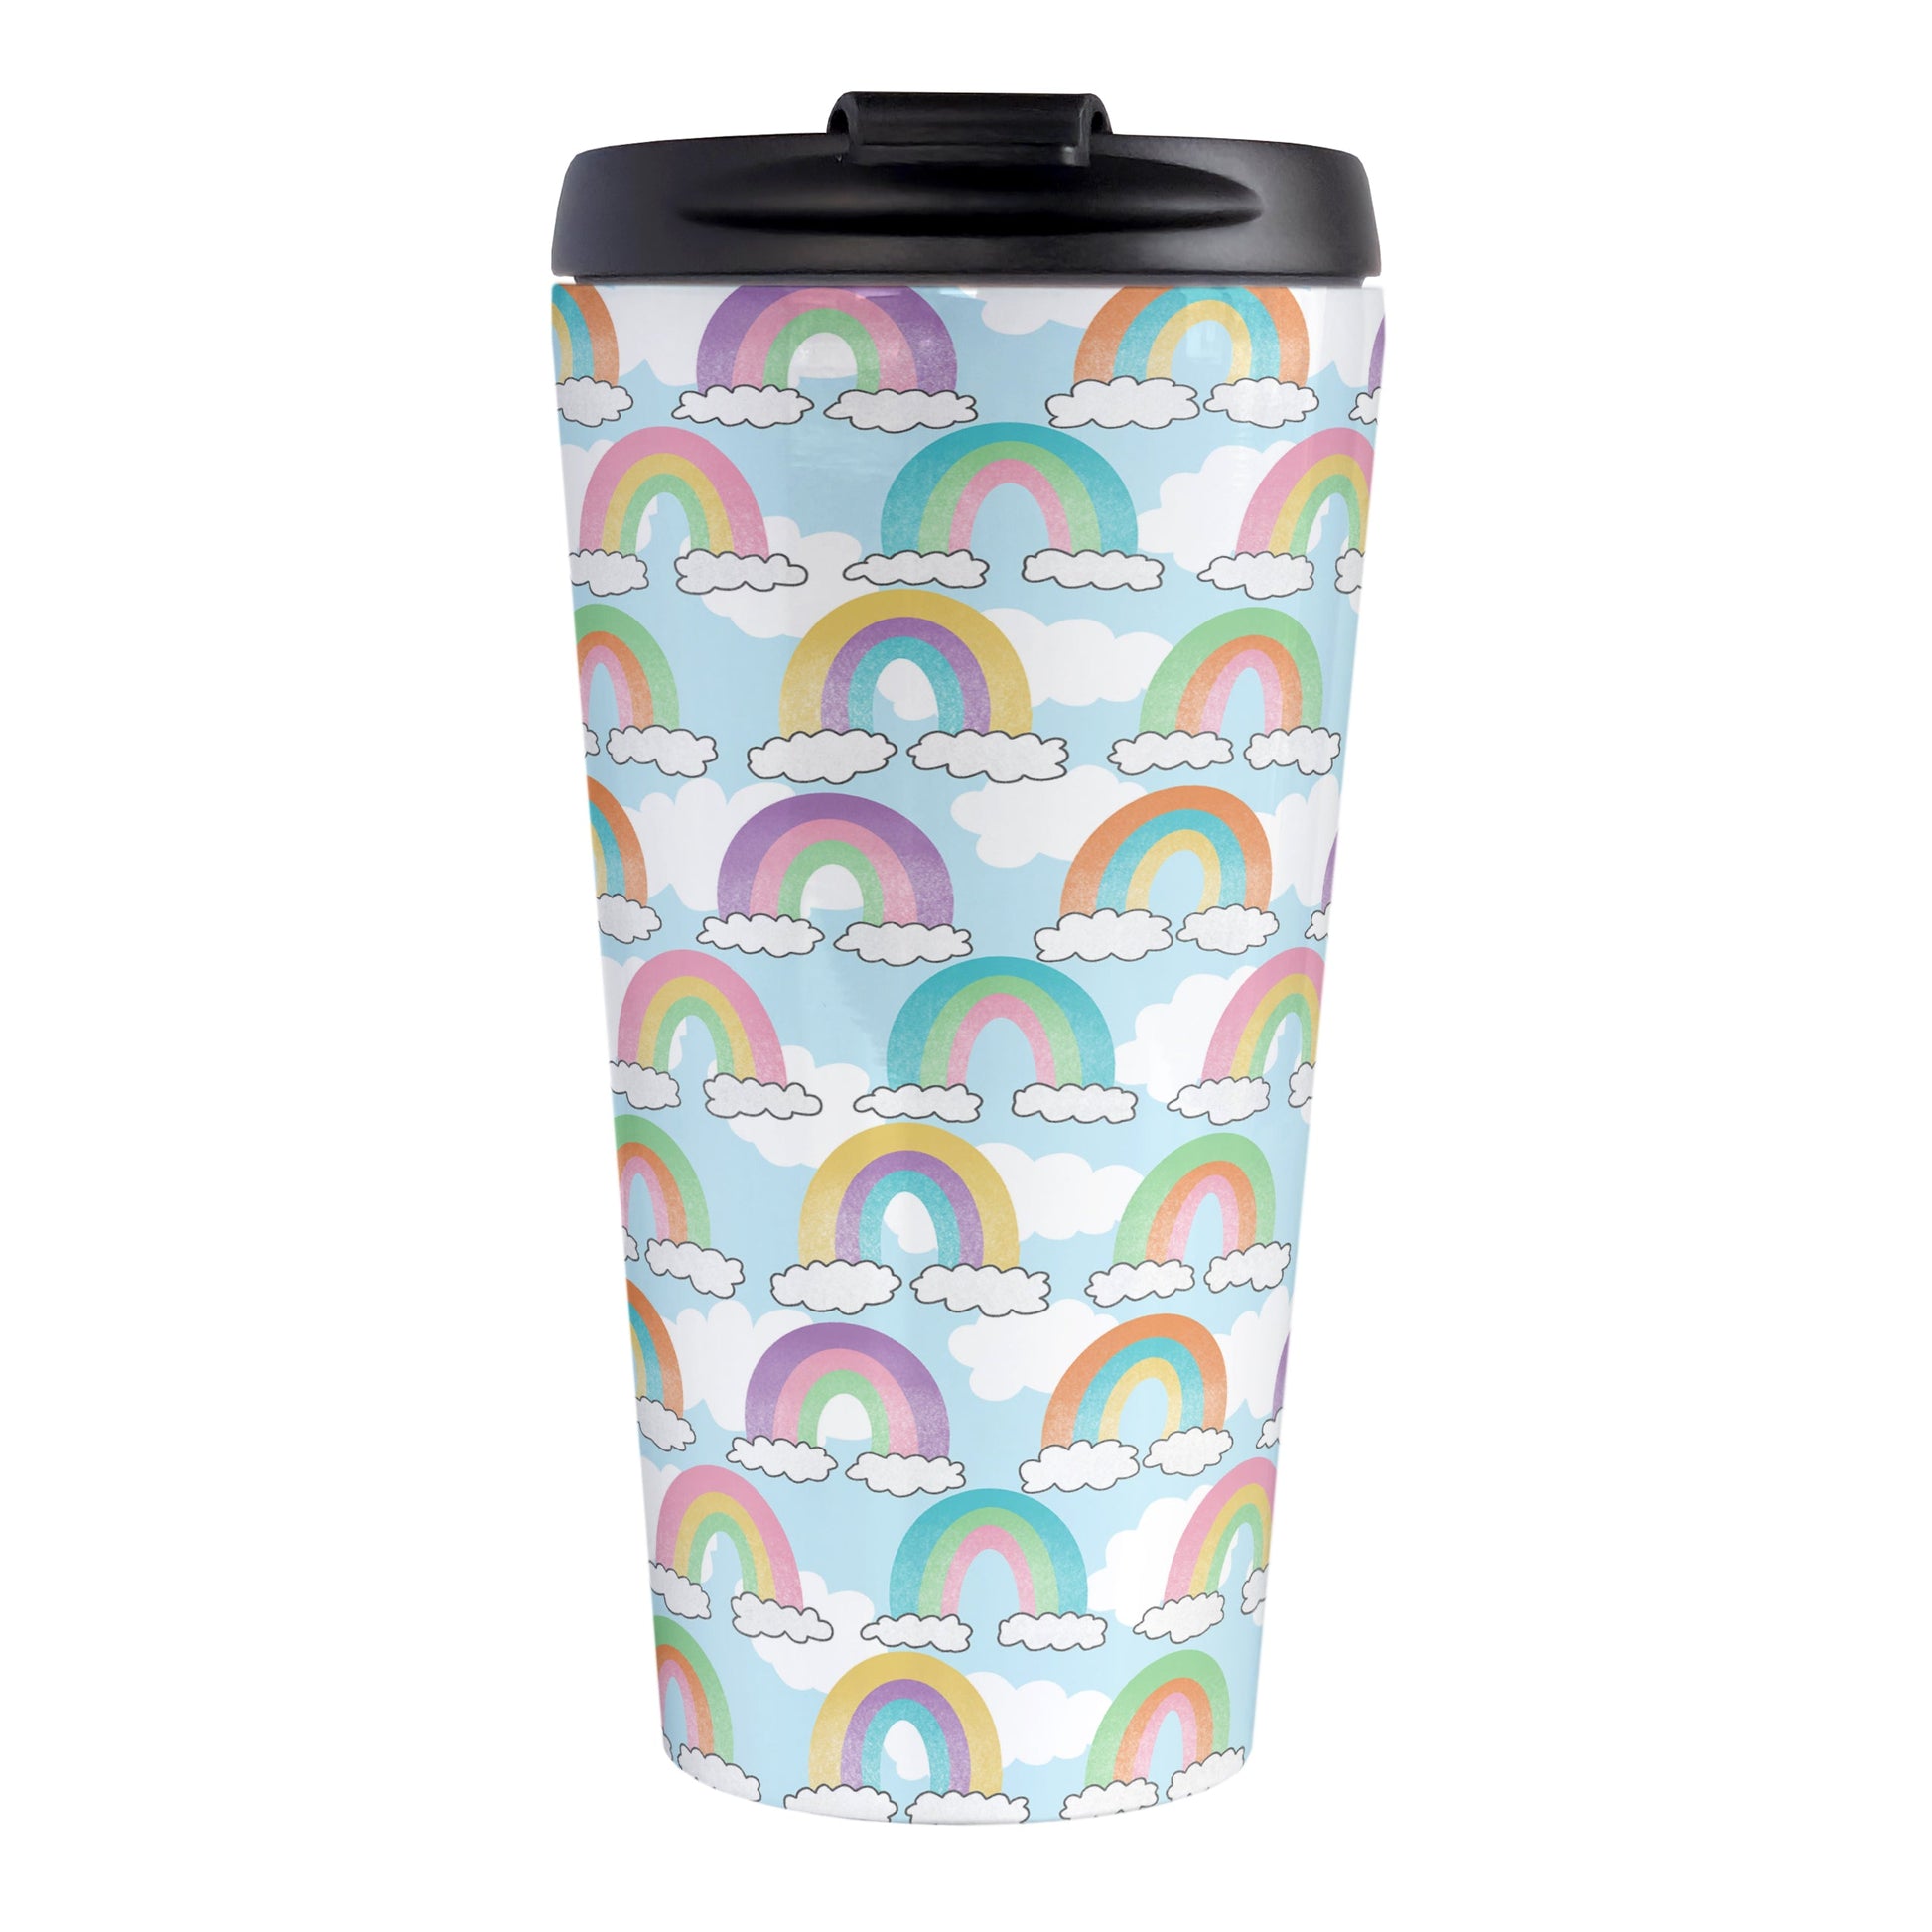 Colorful Rainbows Sky Pattern Travel Mug (15oz, stainless steel insulated) at Amy's Coffee Mugs